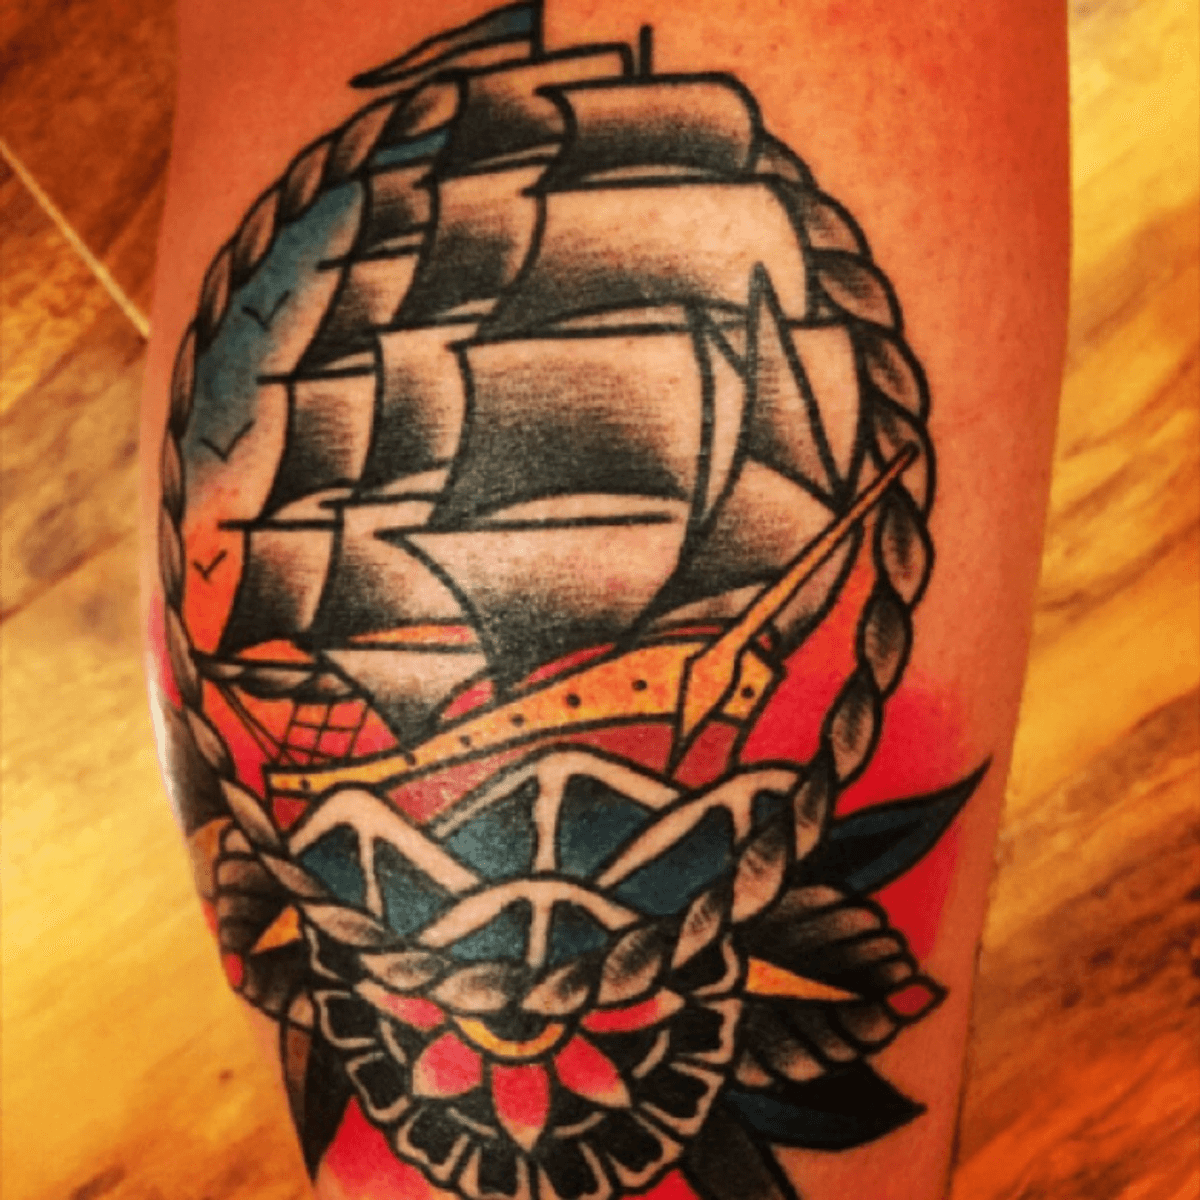 Tattoo uploaded by Craig May • Dope ship #traditionaltattoo #ship # ...